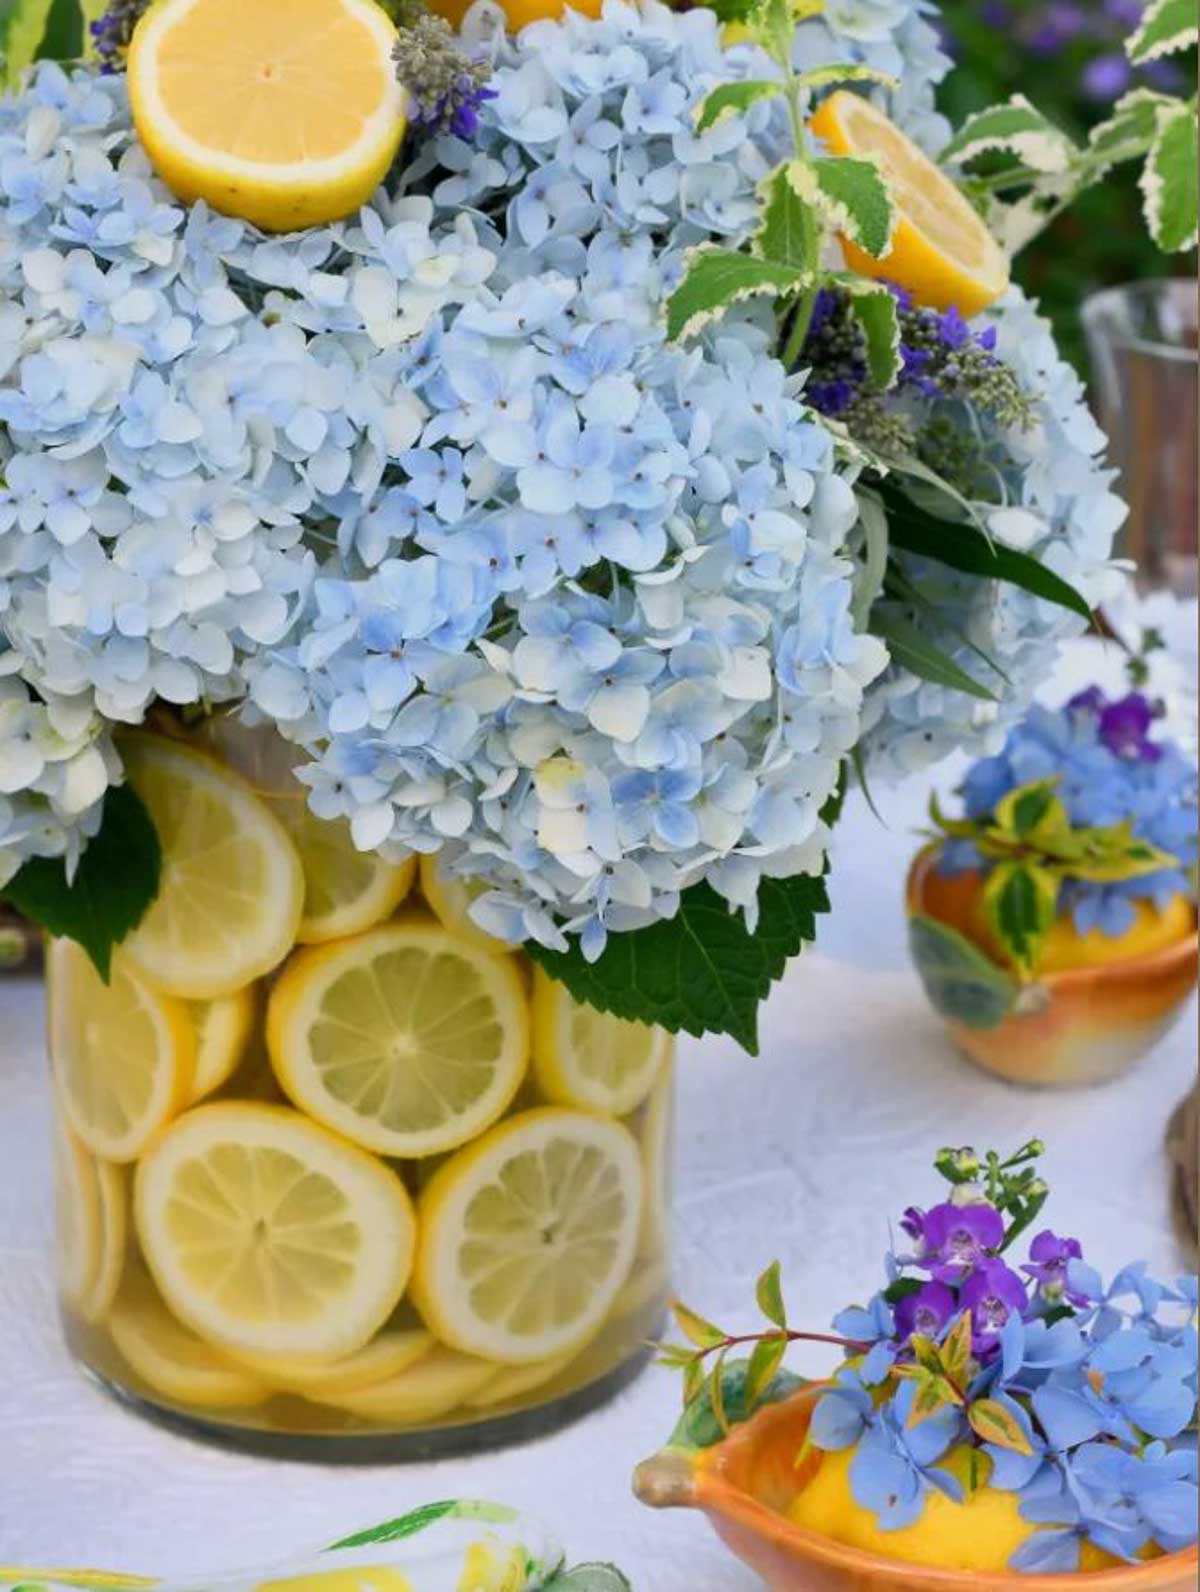 clear glass vase with sliced lemons around the side and an arrangement of blue hydrangeas